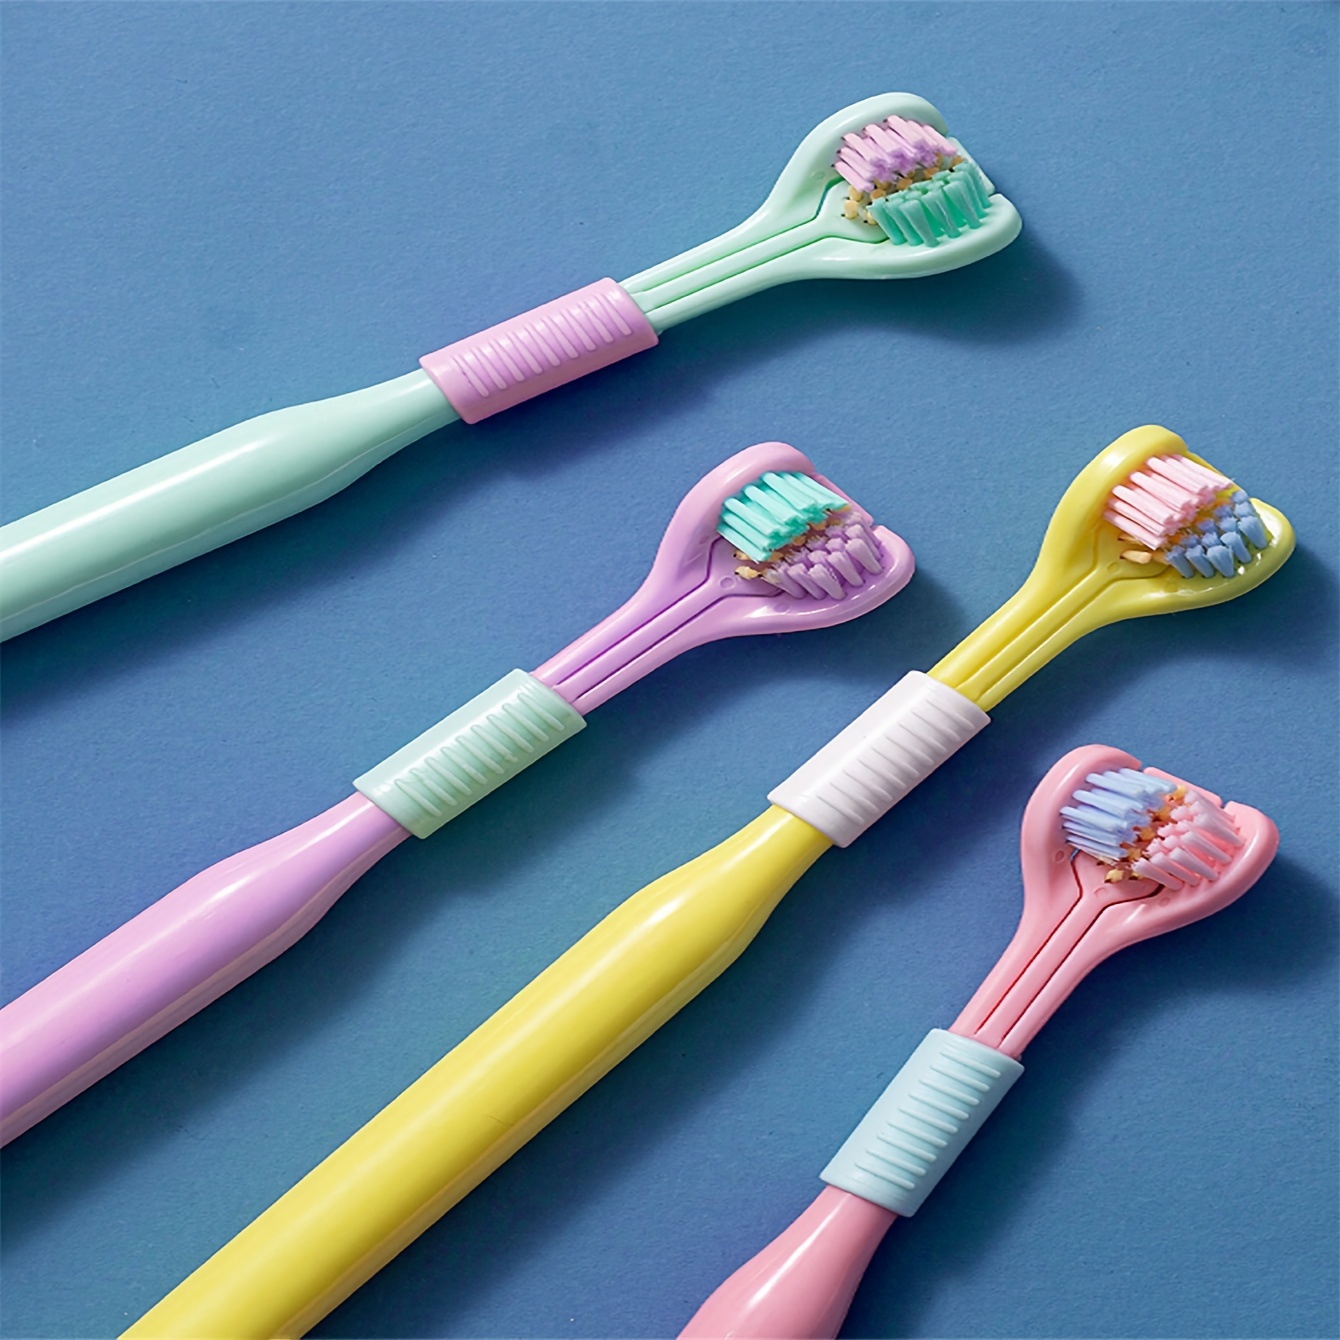 

1pc 3-sided Toothbrush Soft And Gentle Clean, Manual Toothbrushes With Extra Soft Bristles For Teeth Gums, For Deep Cleaning Oral Care At Home For Daily Life